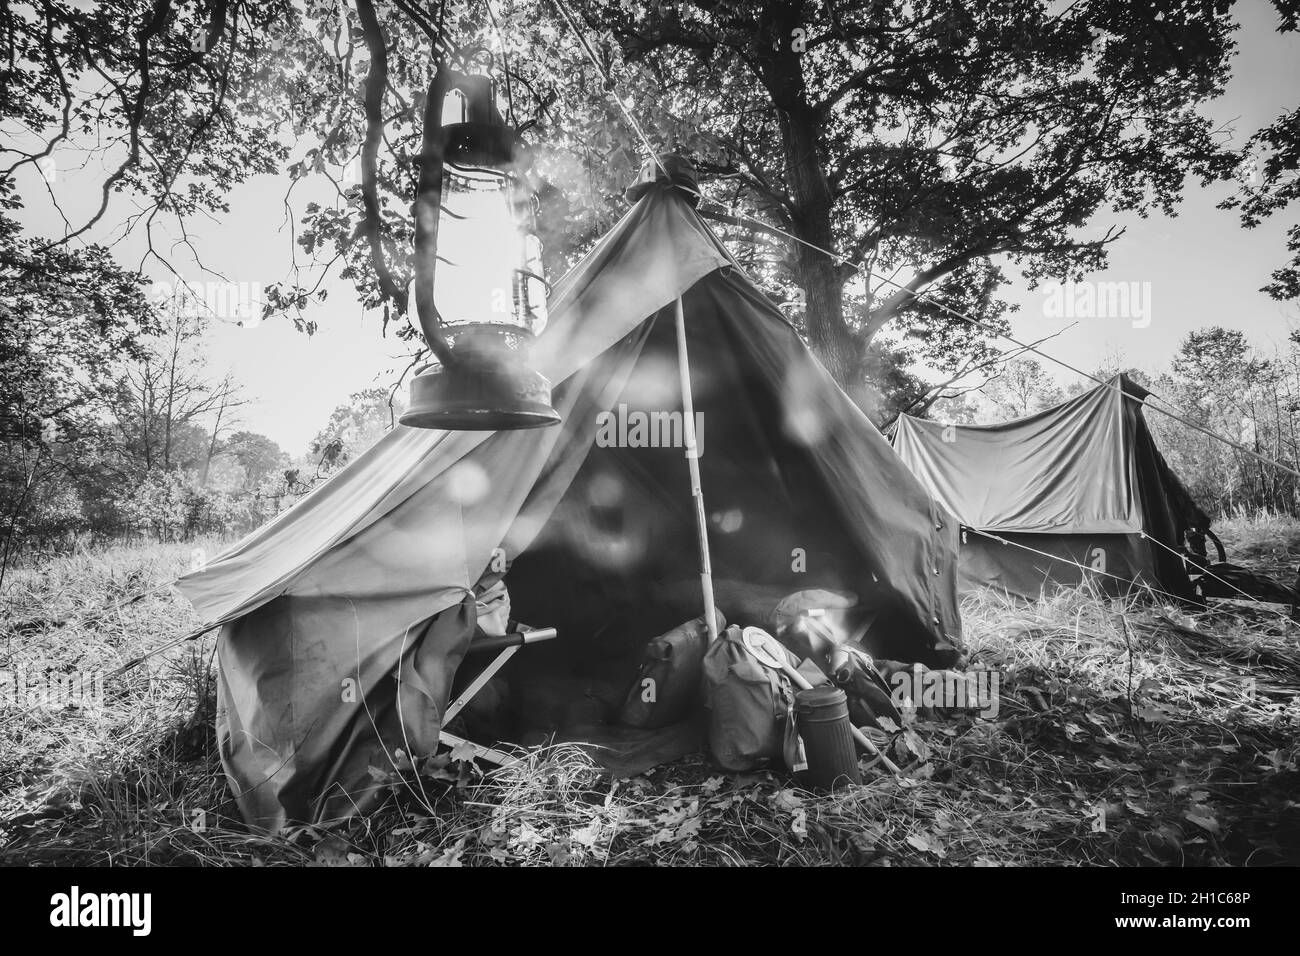 World War II German Wehrmacht Infantry Tent In Forest Camp. WWII WW2 German Ammunition. Photo In Black And White Colors Stock Photo